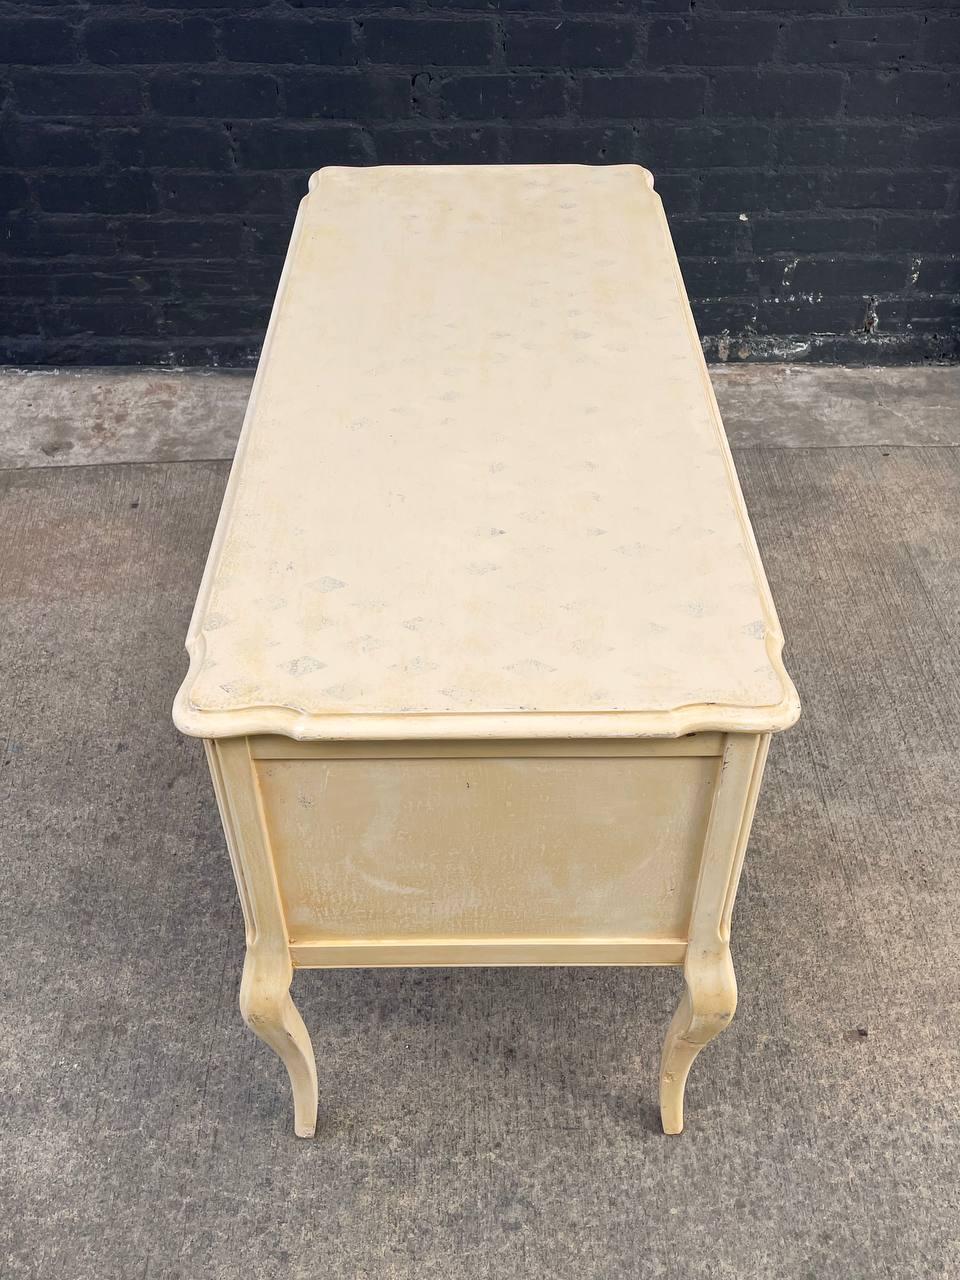 Mid-20th Century Vintage French Provincial Style Painted Writing Desk For Sale